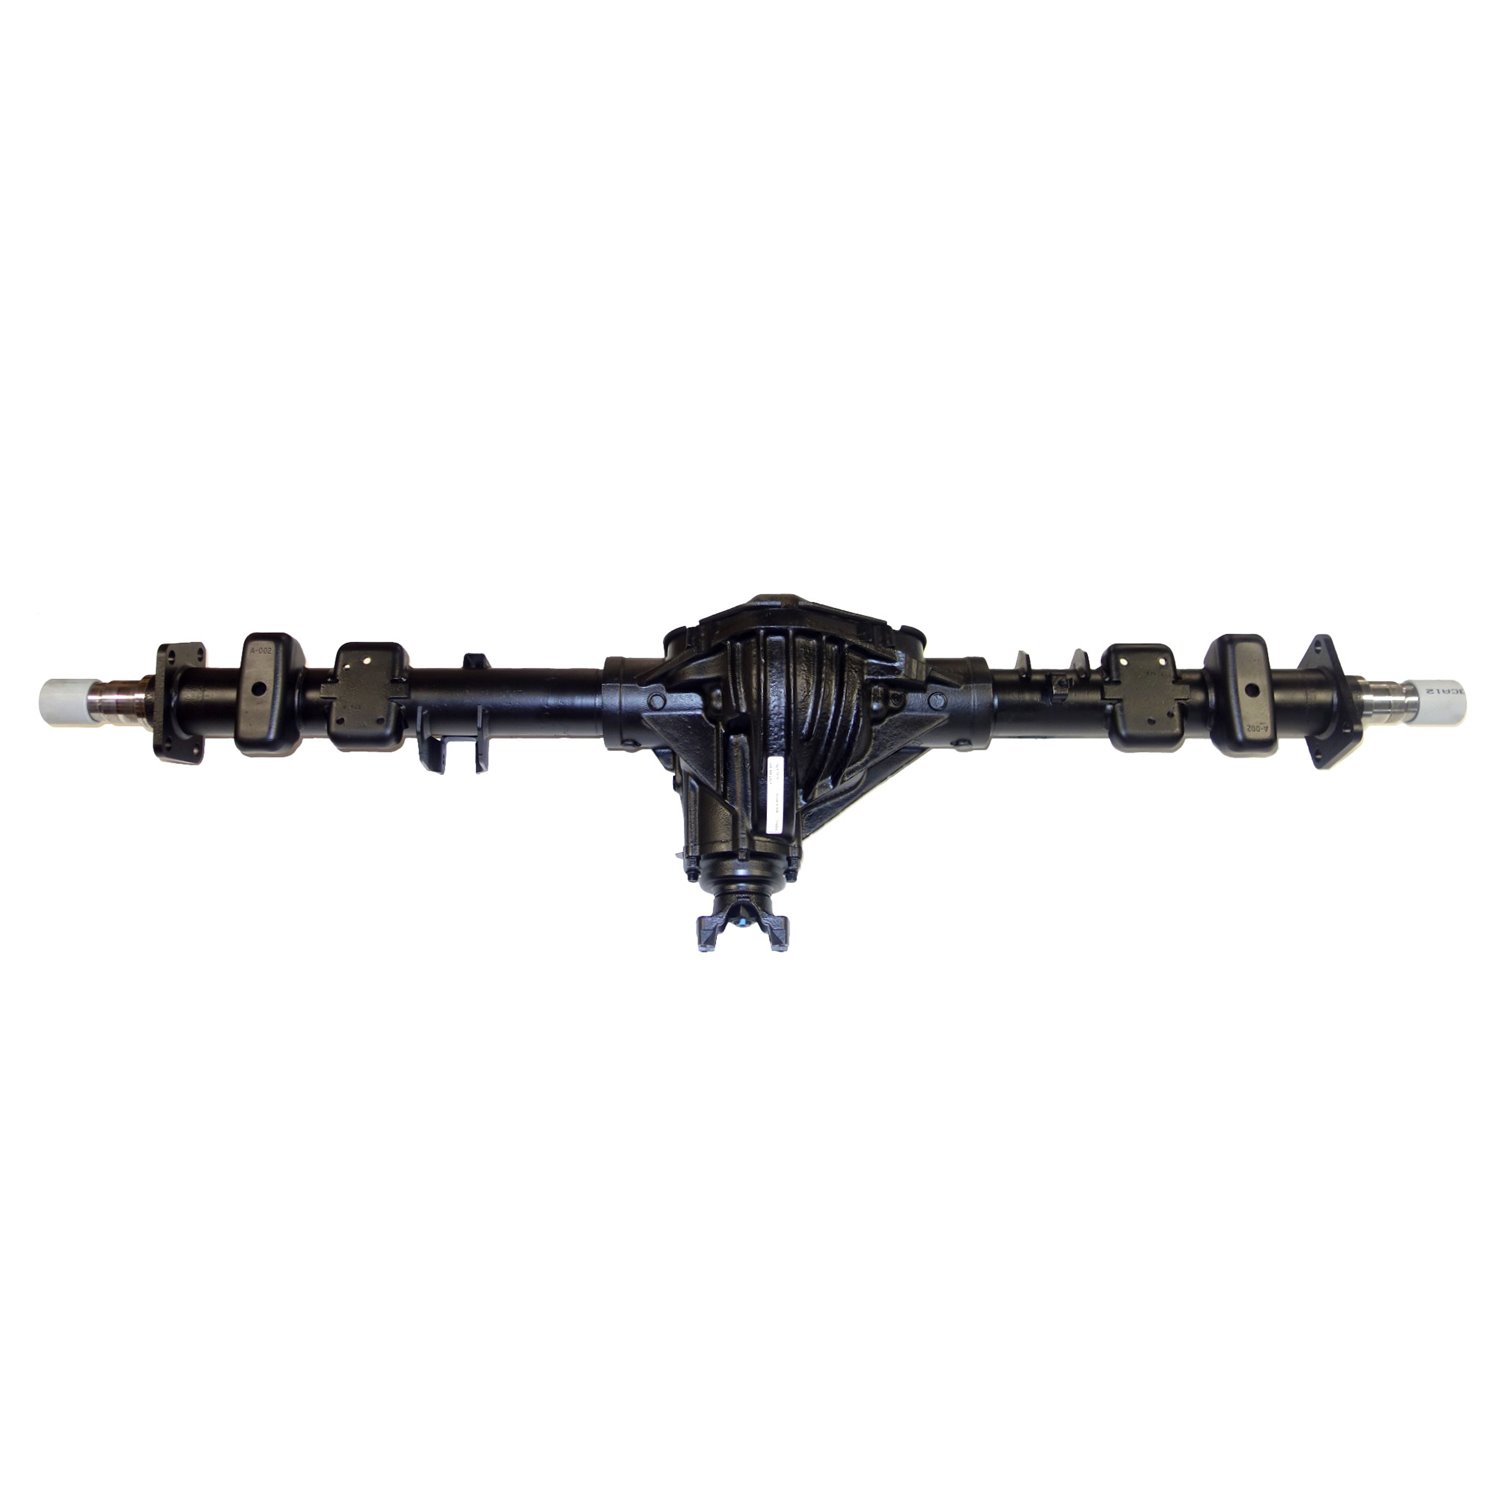 Remanufactured Axle Assy for GM 14 Bolt Truck 90-00 GM 3500, 4.56 , DRW w/o Wide Track